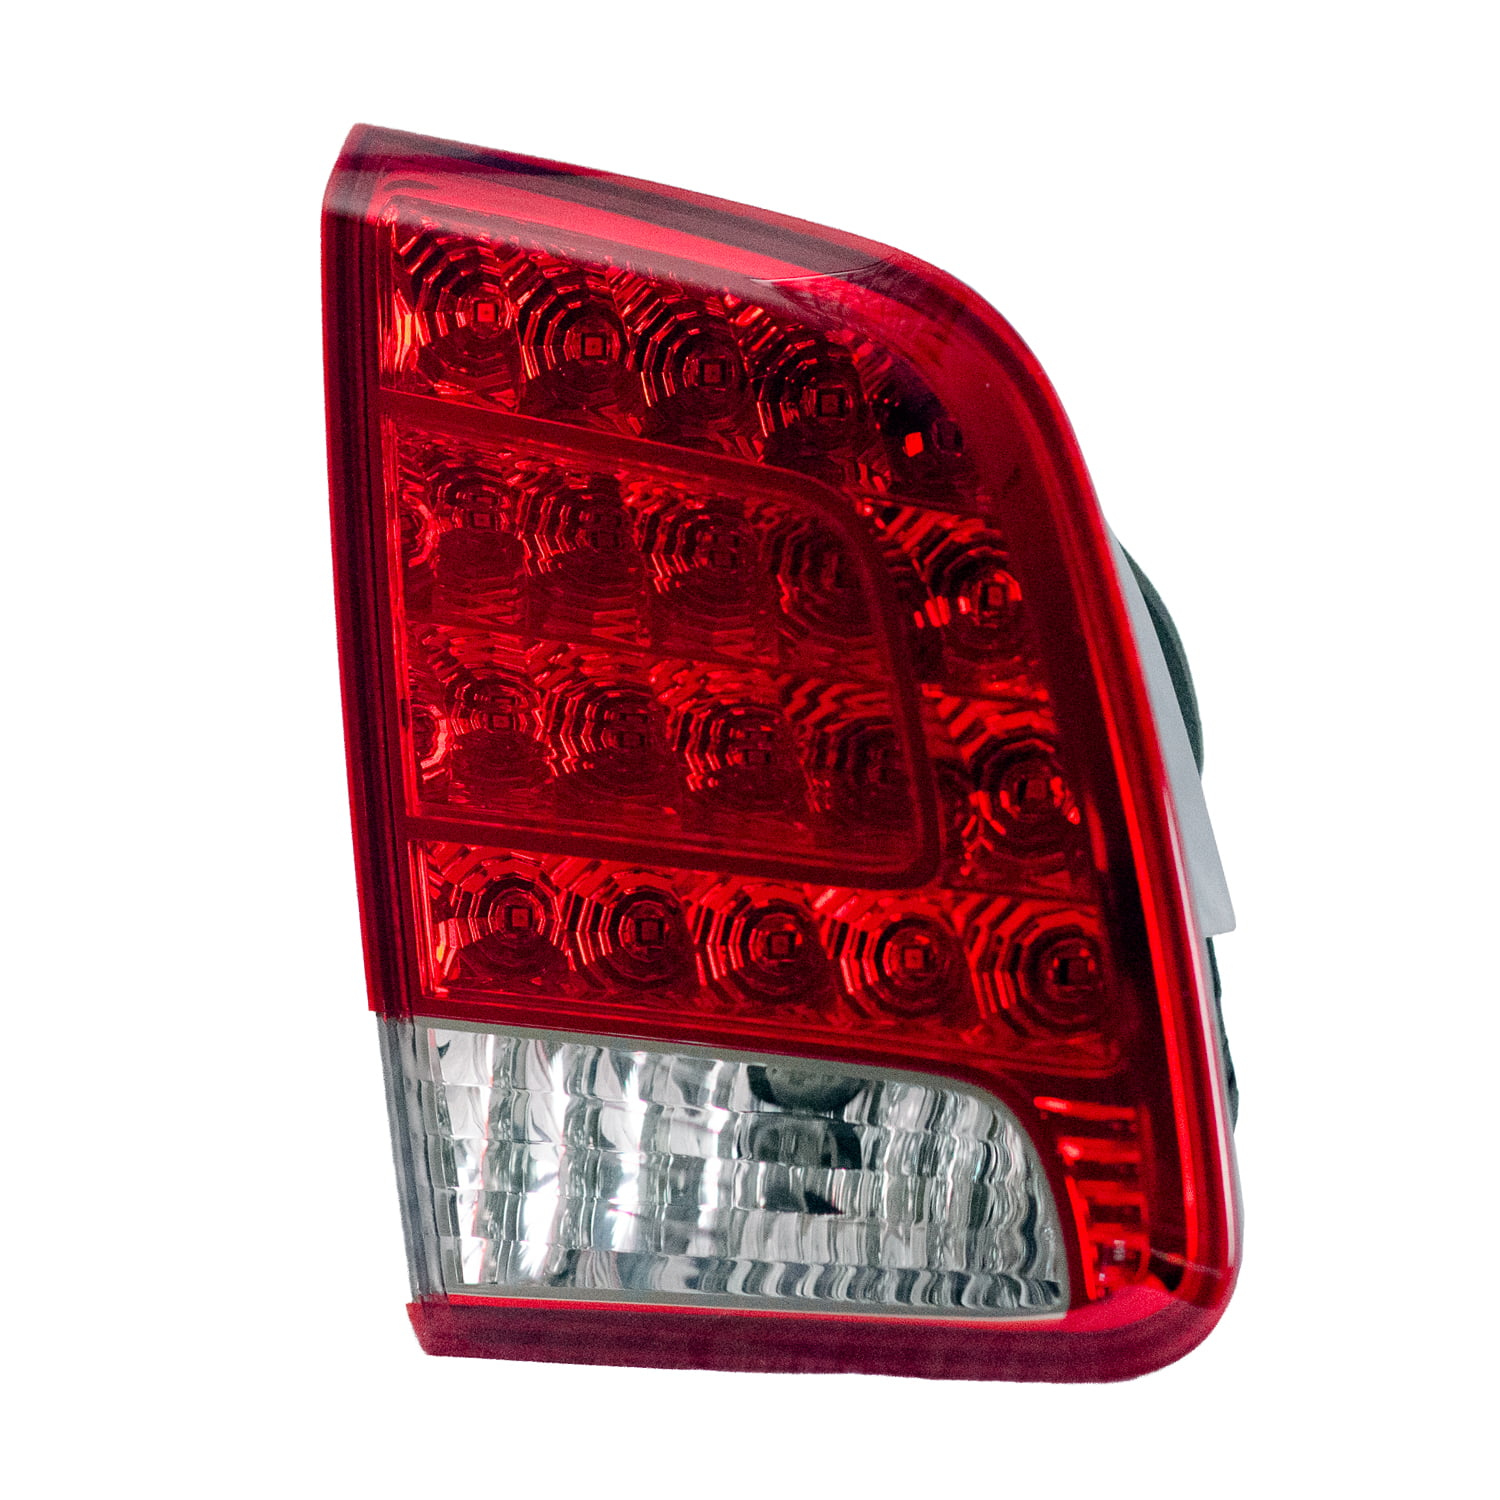 Sherman Replacement Part Compatible with Kia Sorento Passenger Side Taillight Assembly Partslink Number KI2801118 